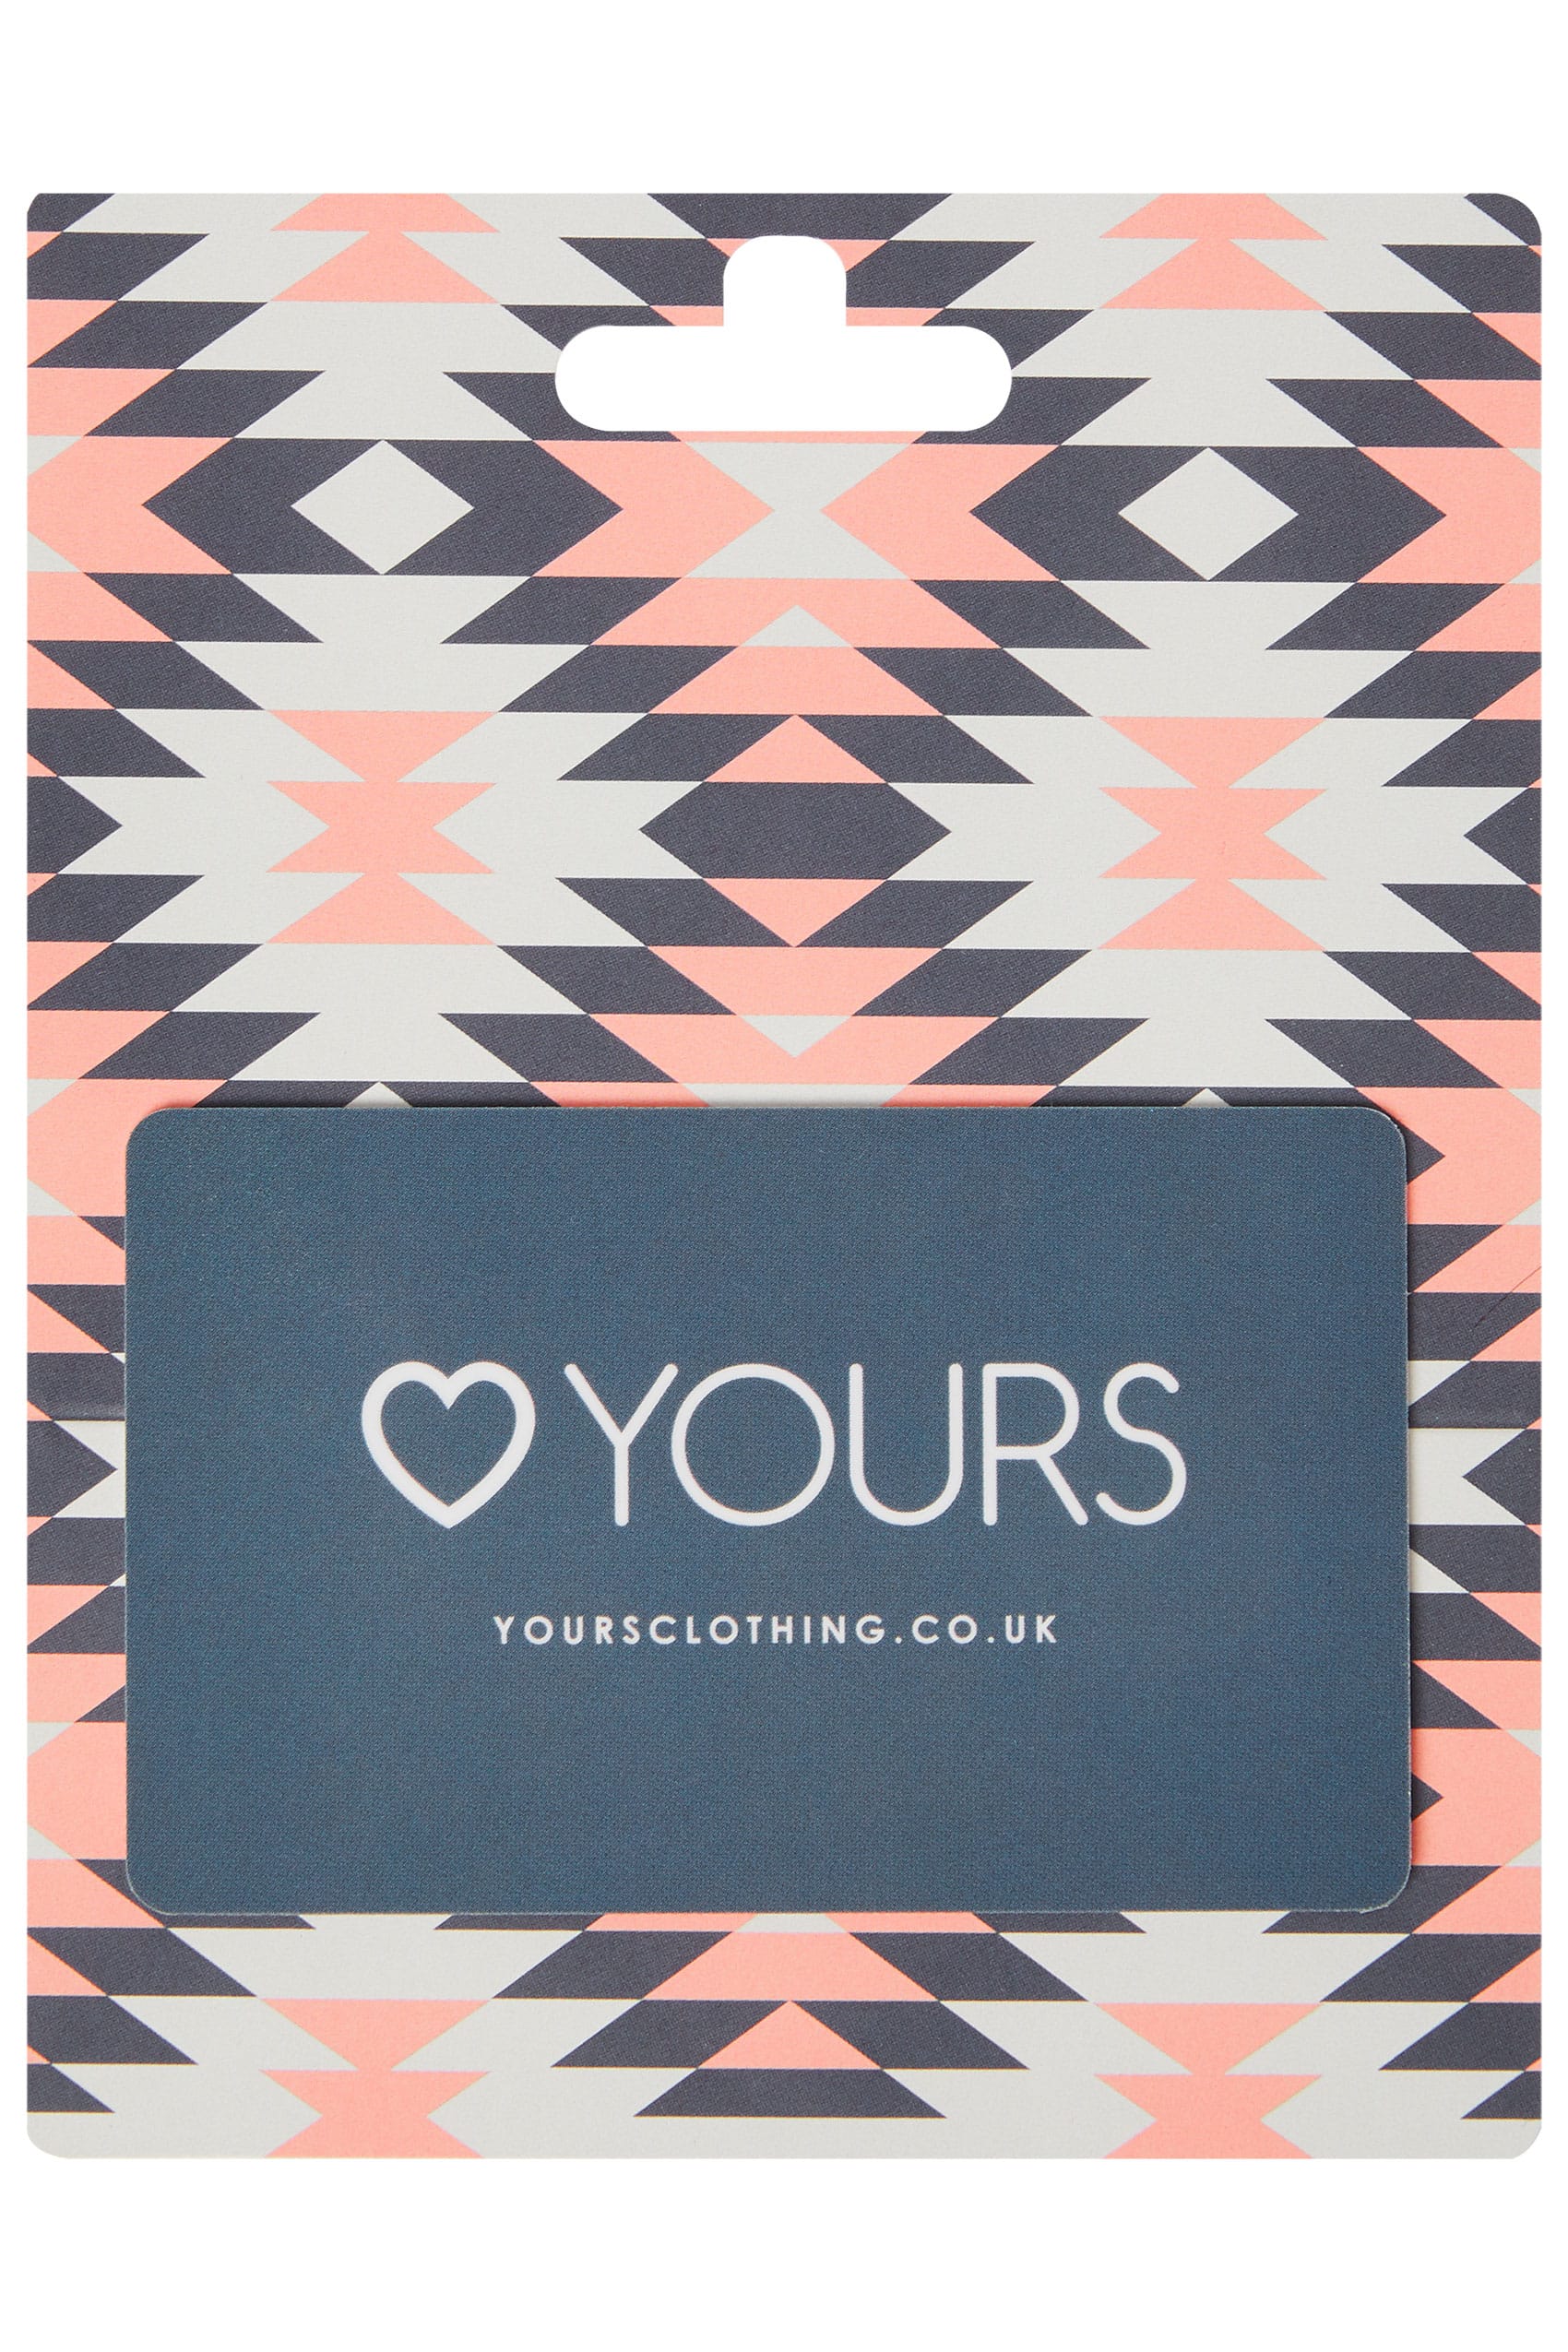 £10 - £150 Yours Clothing Aztec Gift Card 1